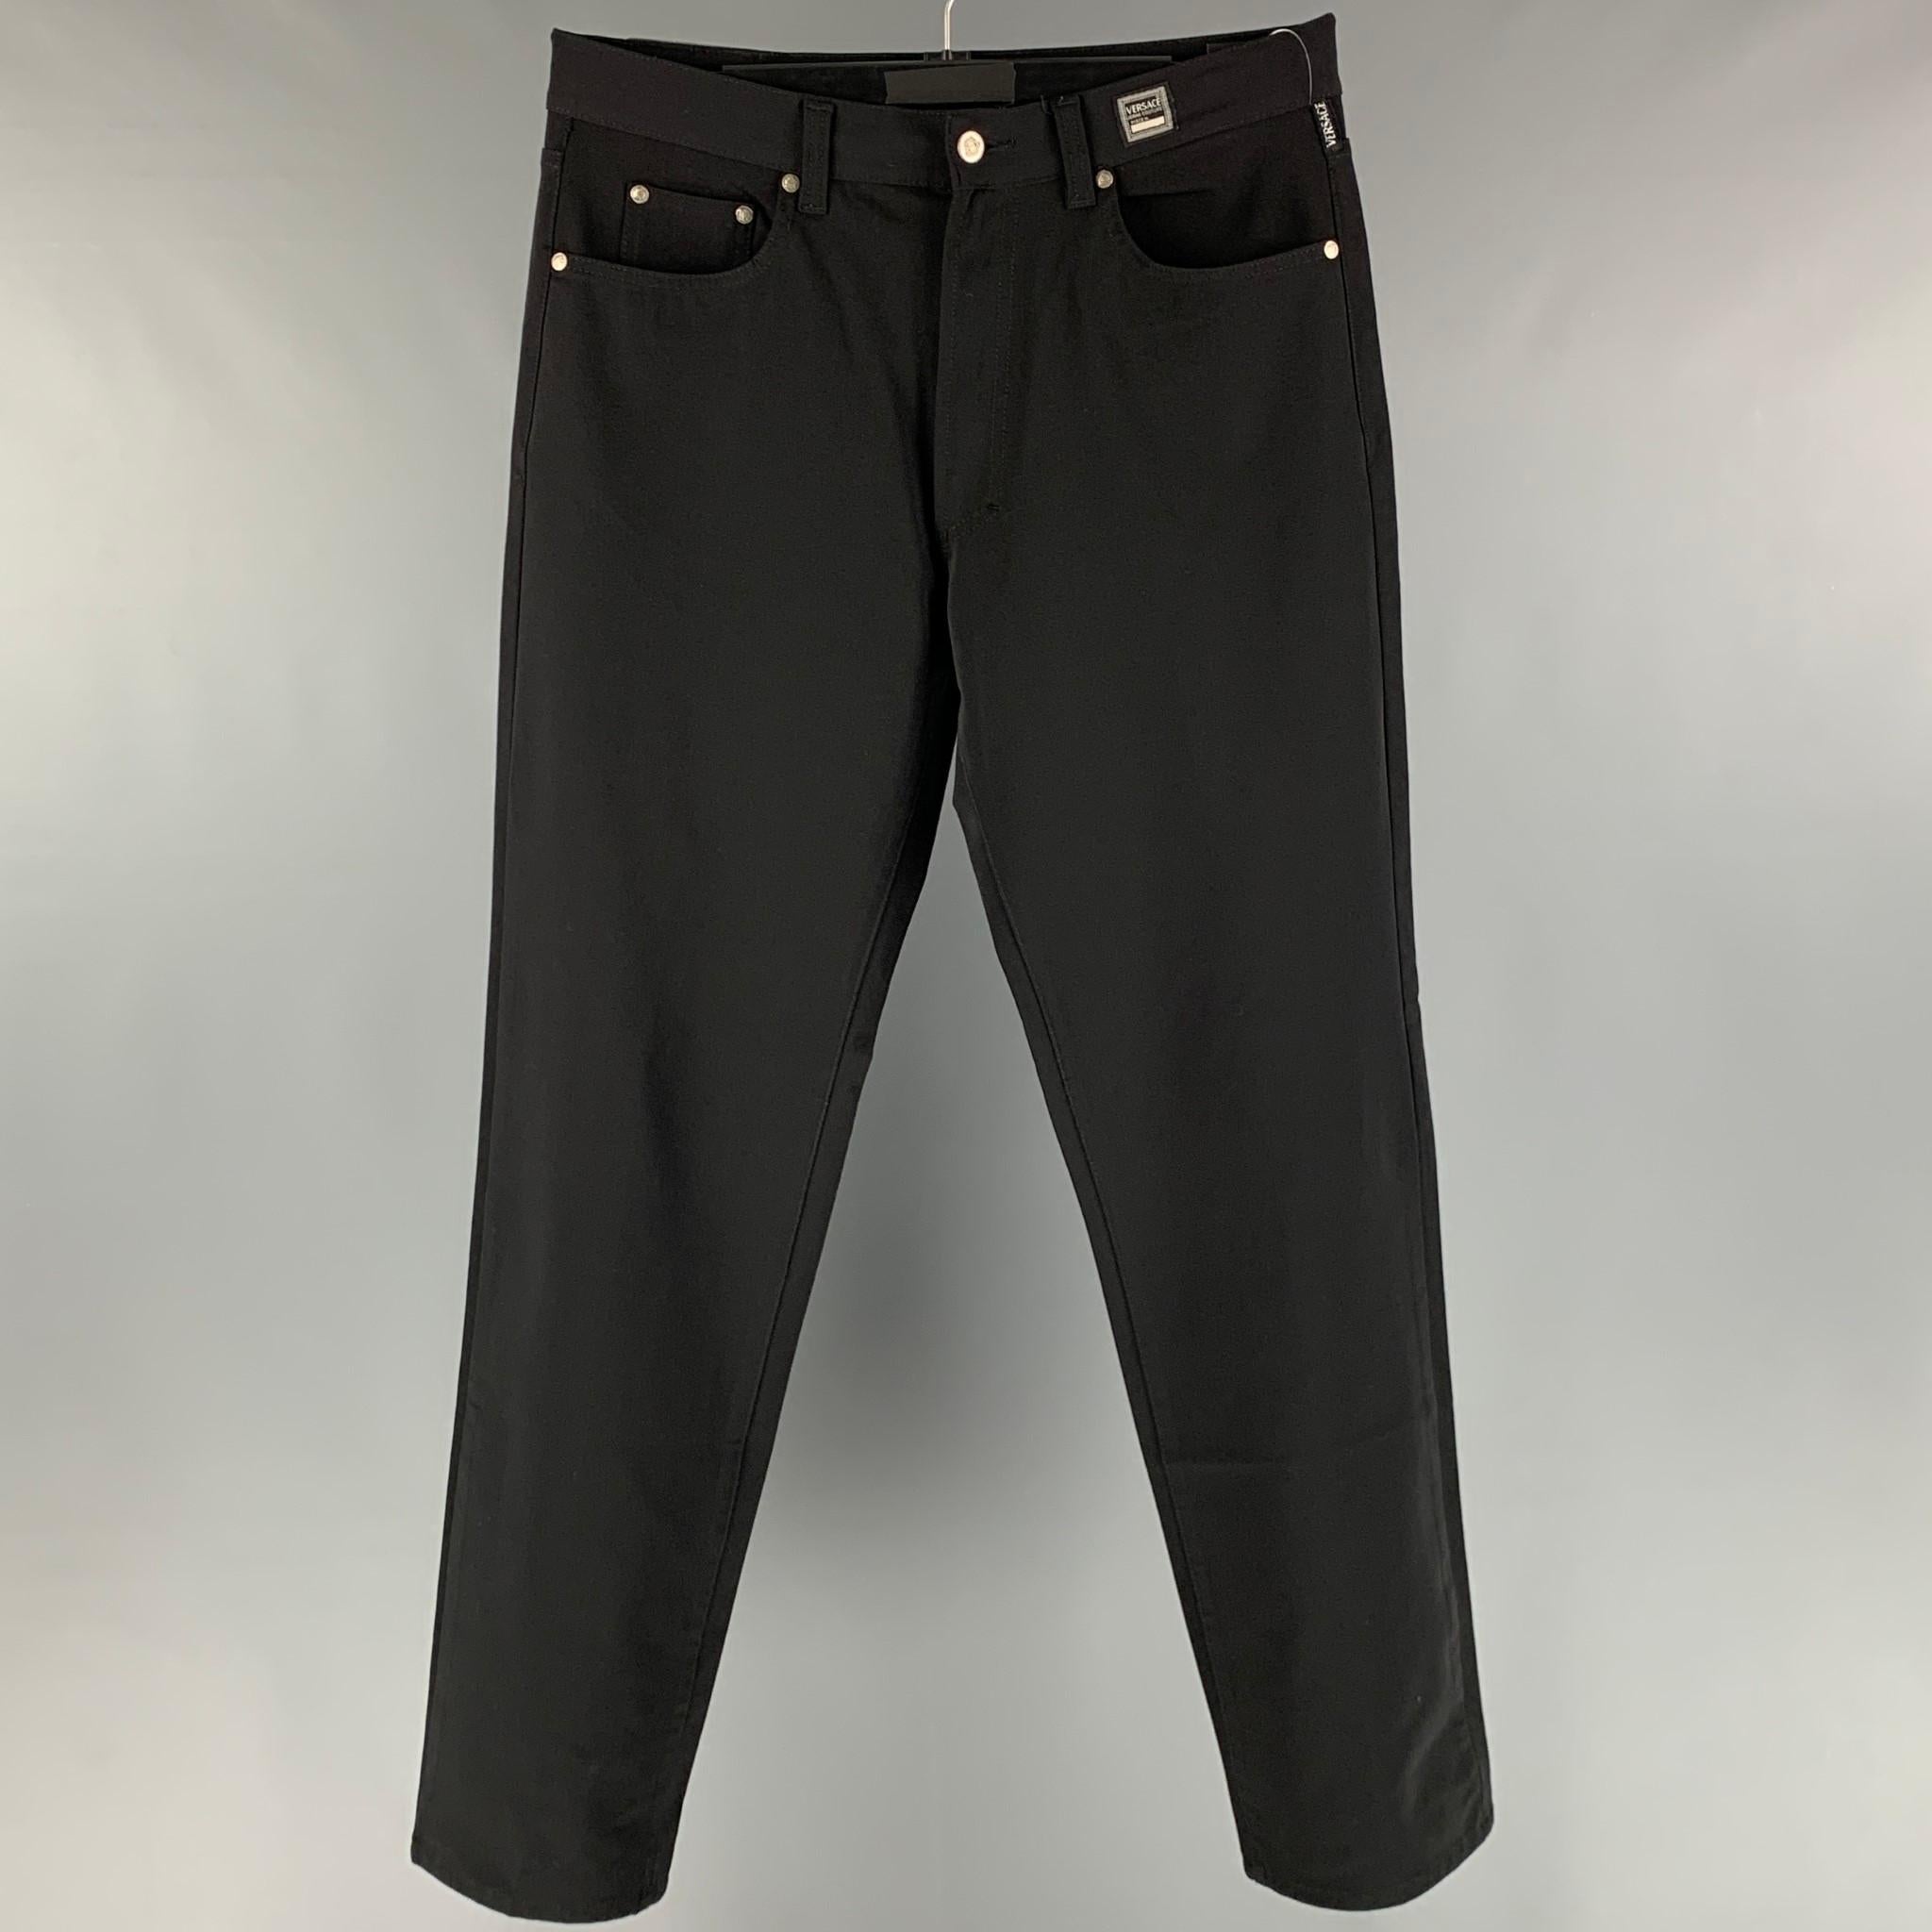 VERSACE JEANS COUTURE jeans pants comes in a black polyester blend featuring a stretch fit, medusa silver tone hardware, and a zip fly closure.

Excellent Pre- Owned Conditions.
Marked:50

Measurements:

Waist: 35 in.
Rise: 10 in.
Inseam: 32.5 in.  